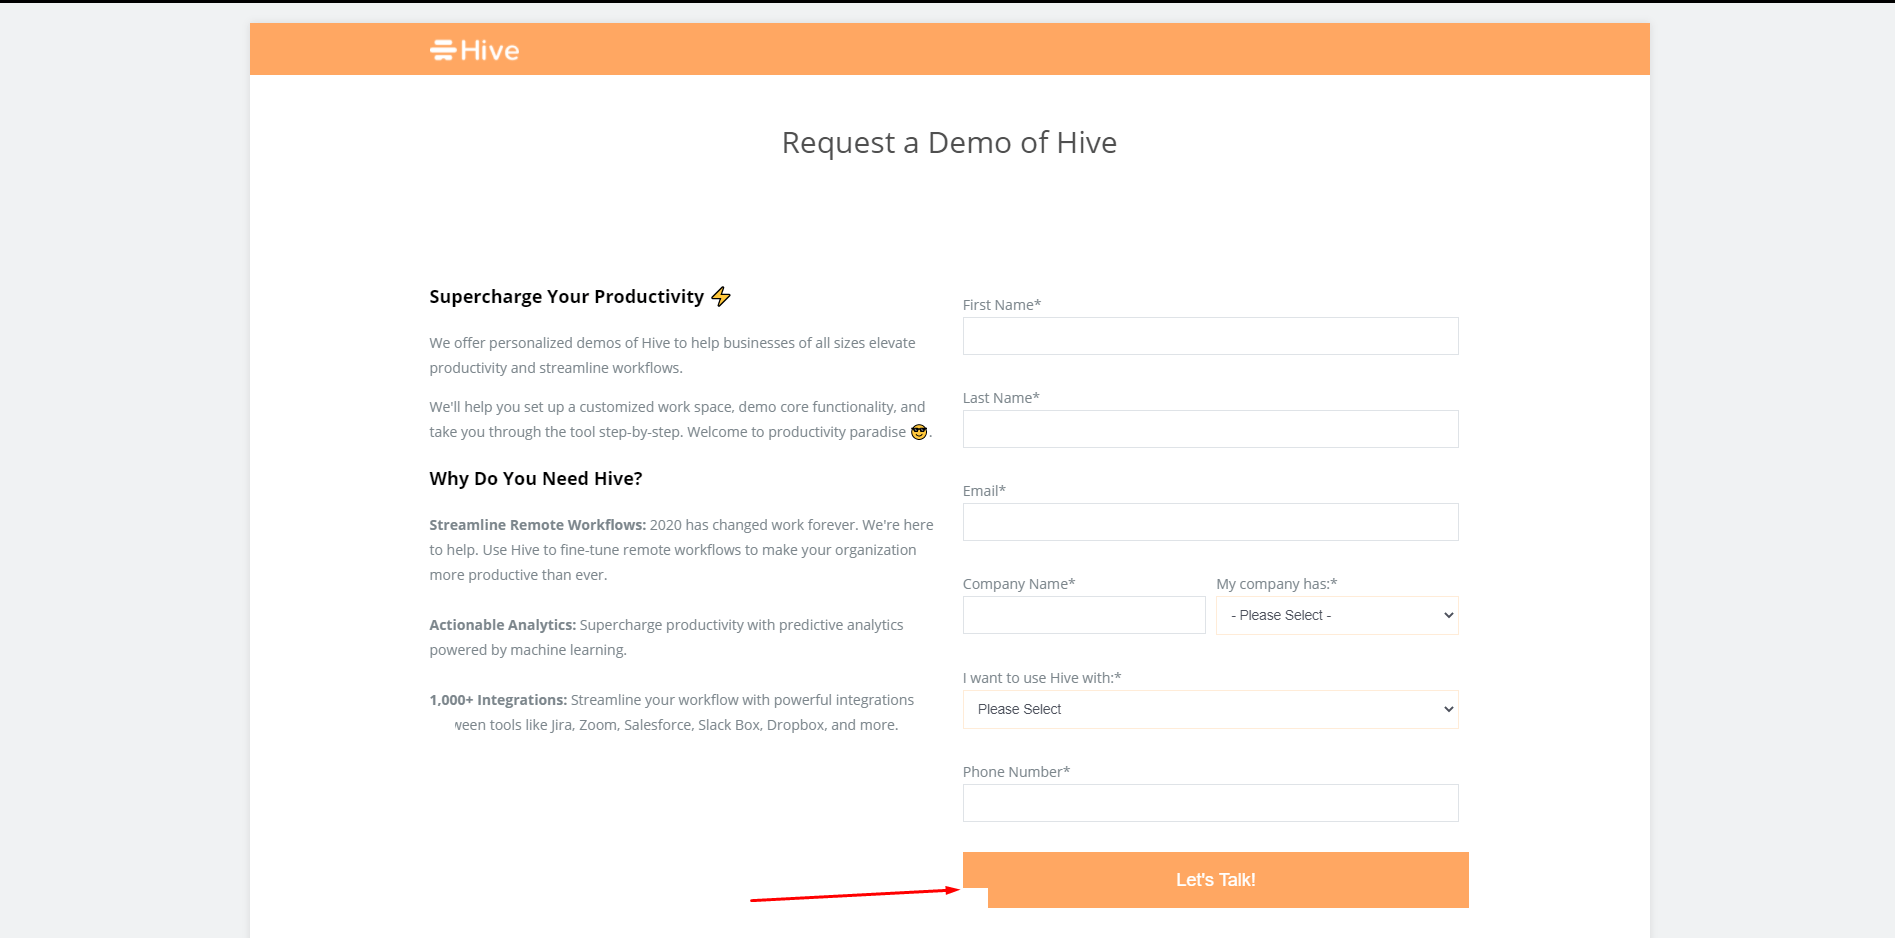 “Let’s Talk” icon is broken on the “Request a Demo of Hive” page